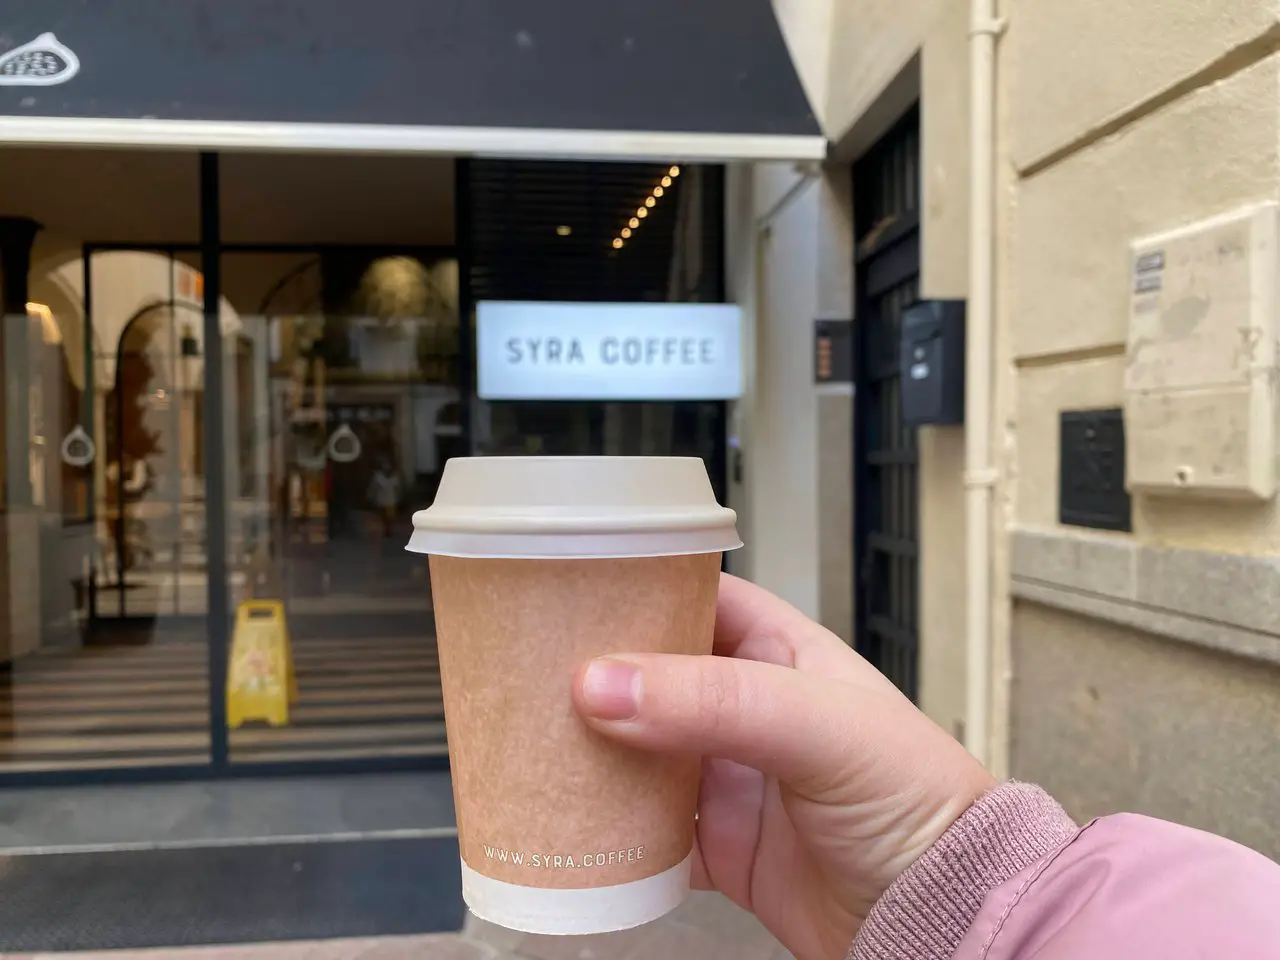 A coffee cup is held in front of the Syra coffee shop.